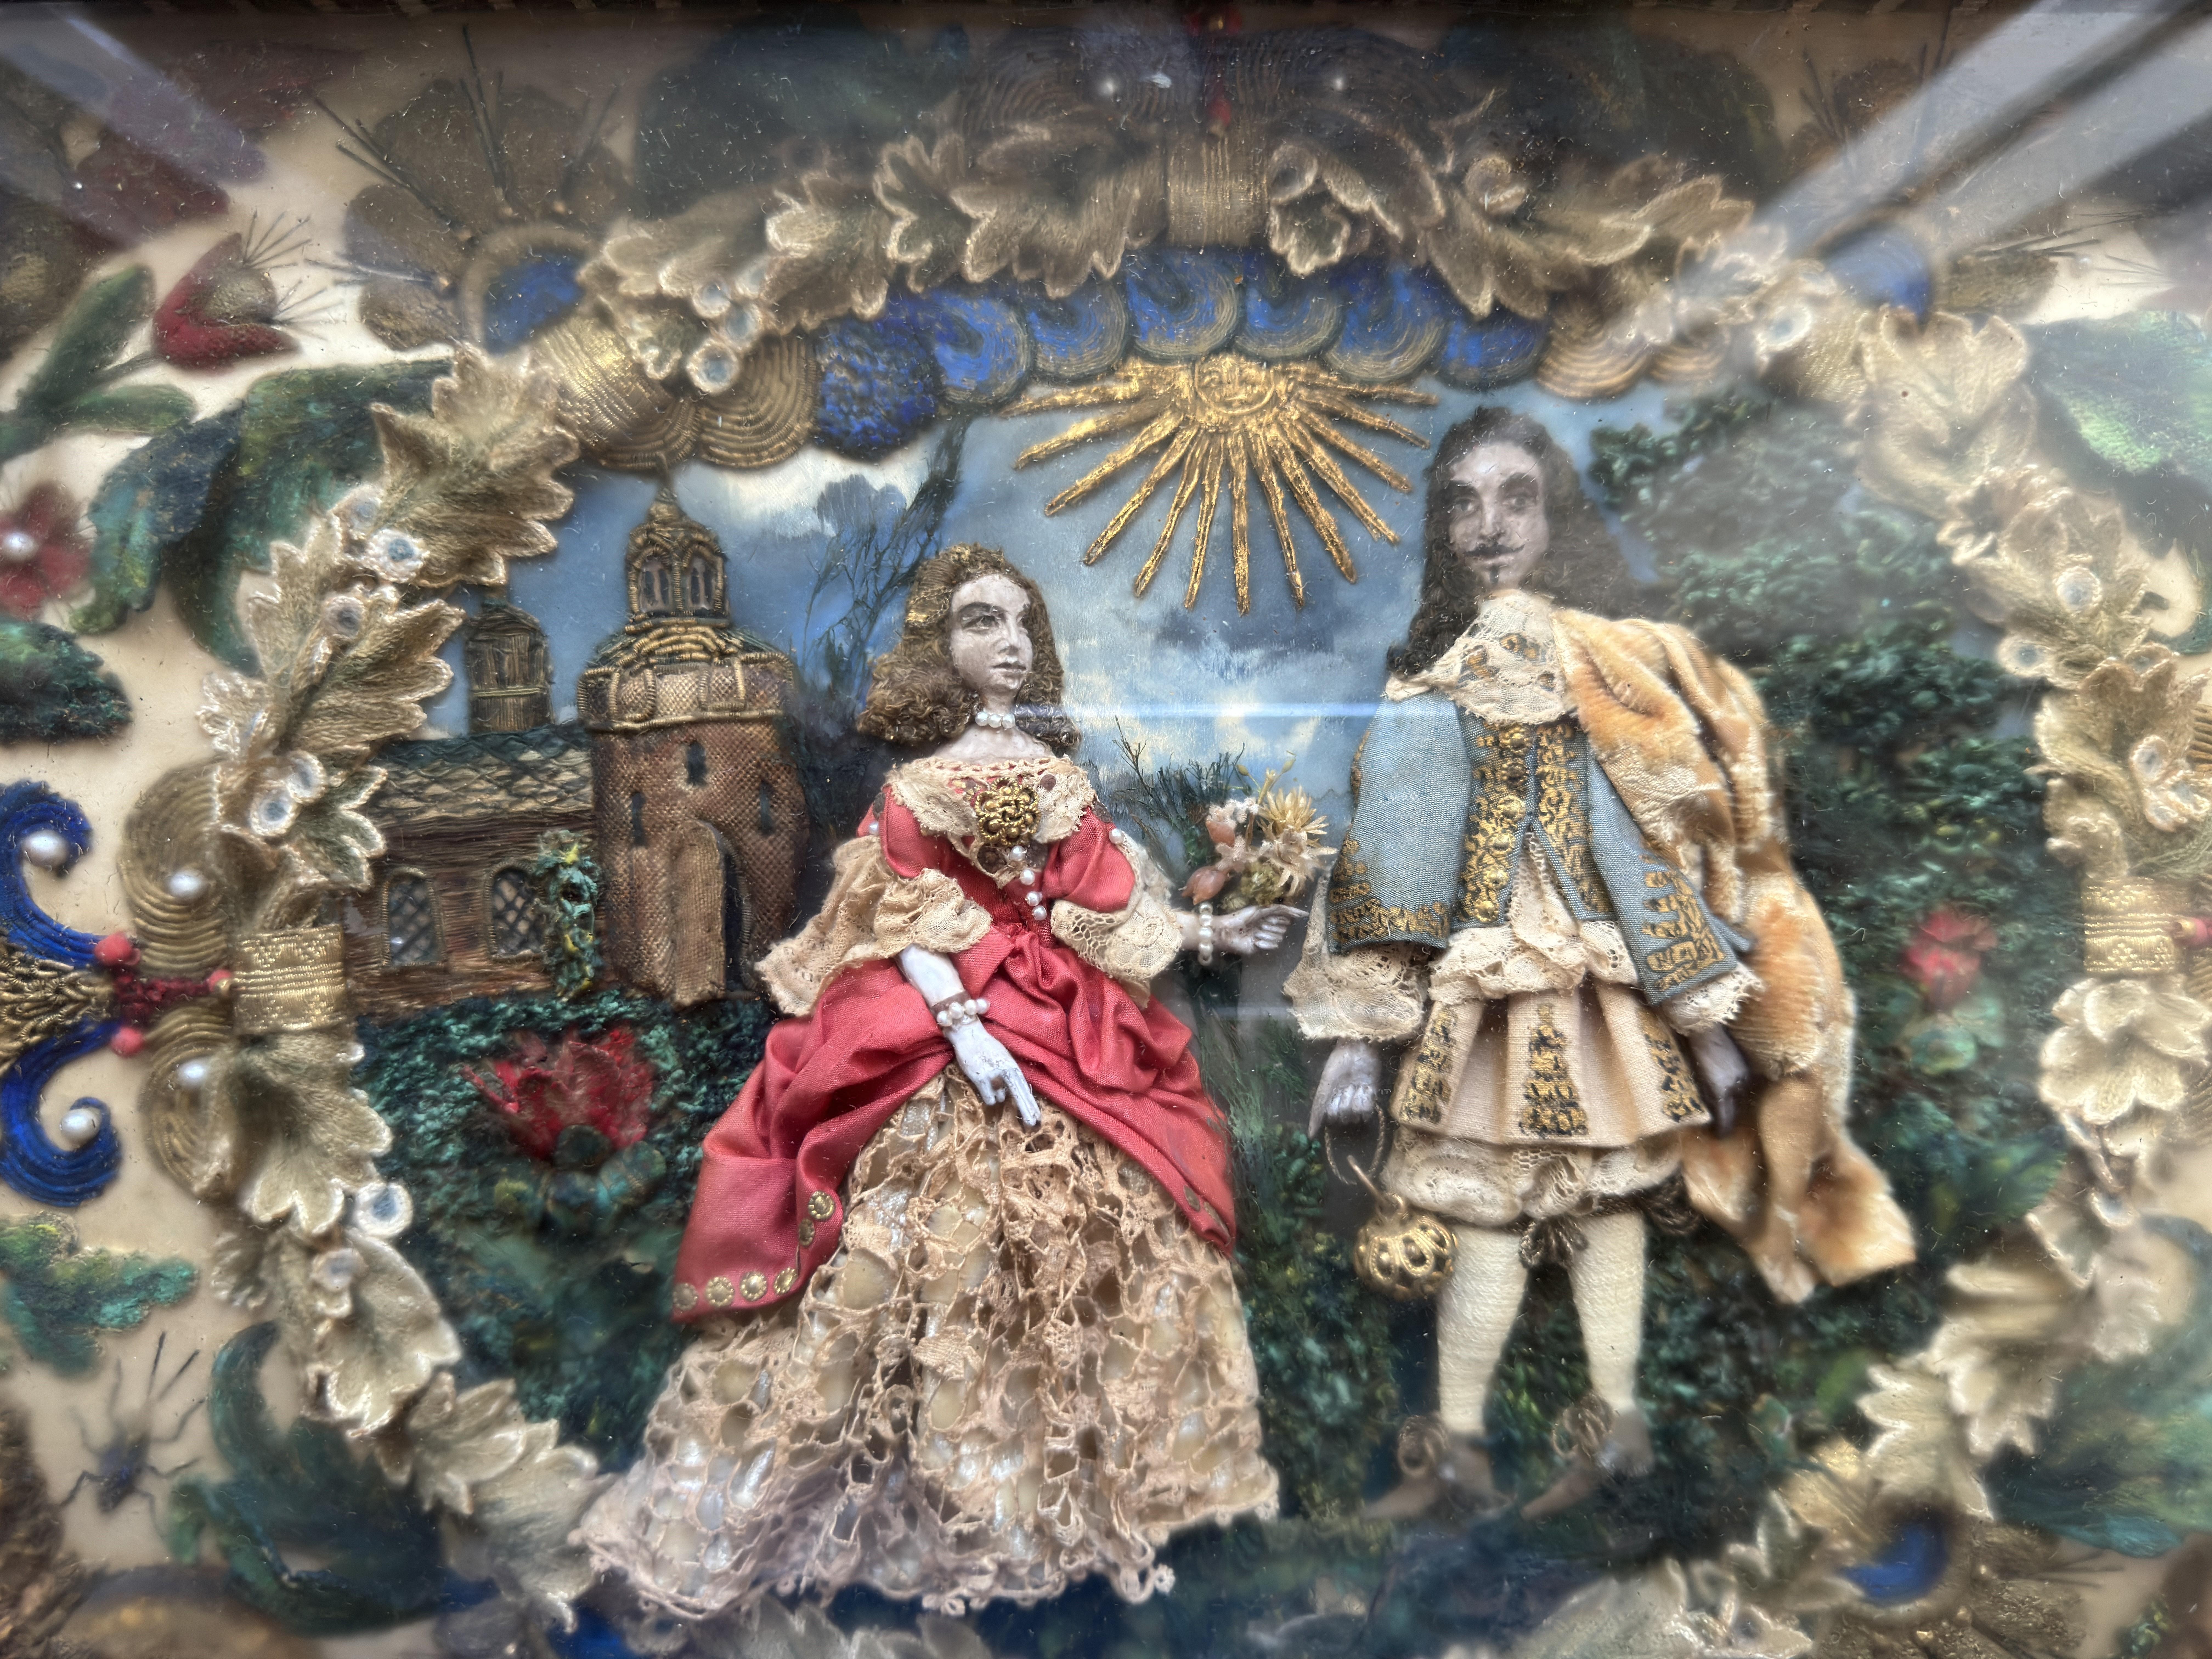 A very fine panel of 'King Charles II and his favourite Lady' in the gardens of a Church / Castle. The bright colours of the raised stumpwork embroidery, and fine detail of the faces, bring to life this antique textile picture. The back of the